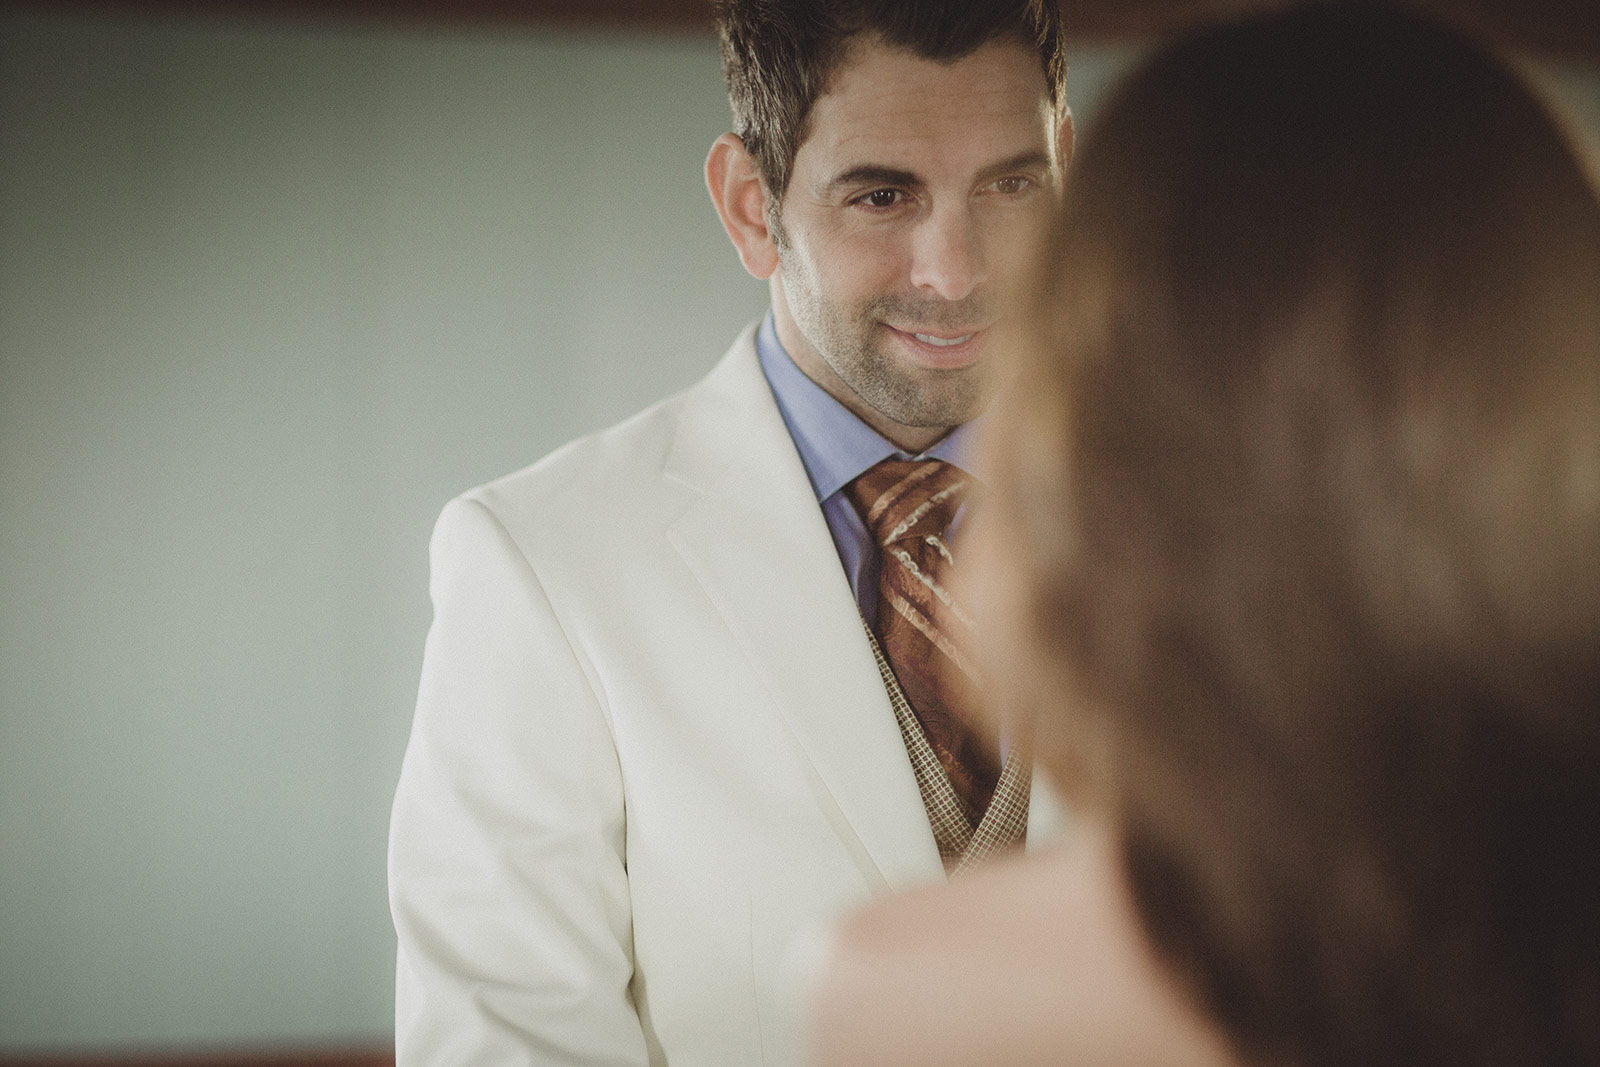 A man in white suit and tie looking at his reflection.